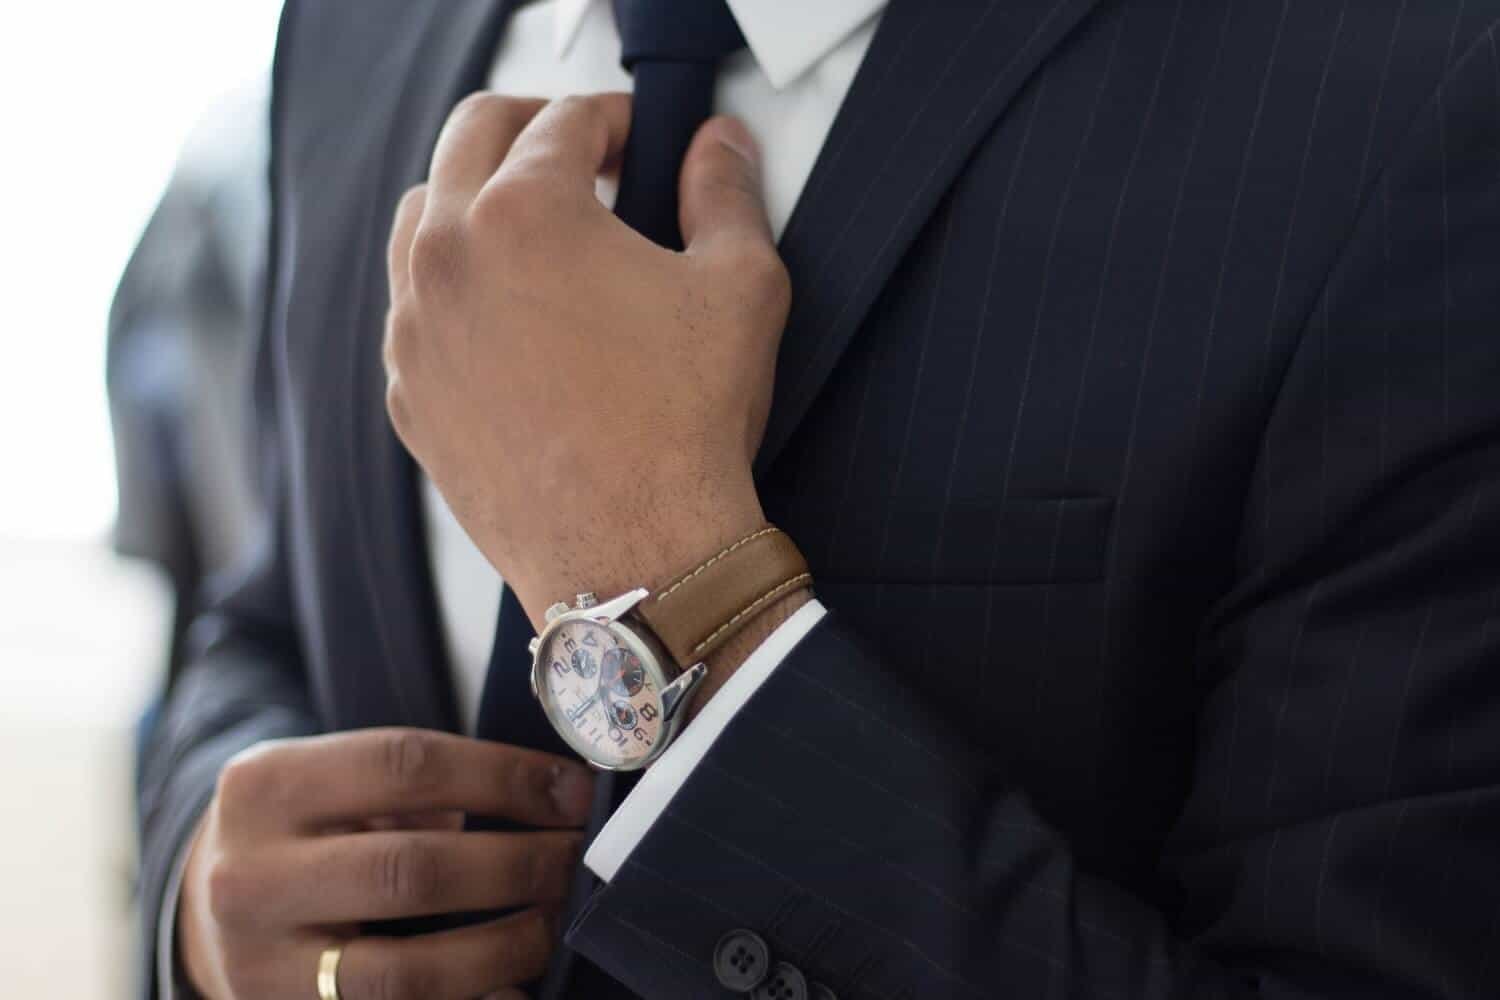 It's important with fashion photography shots to get the details, like this shot of a man's hand while he straightens his tie.